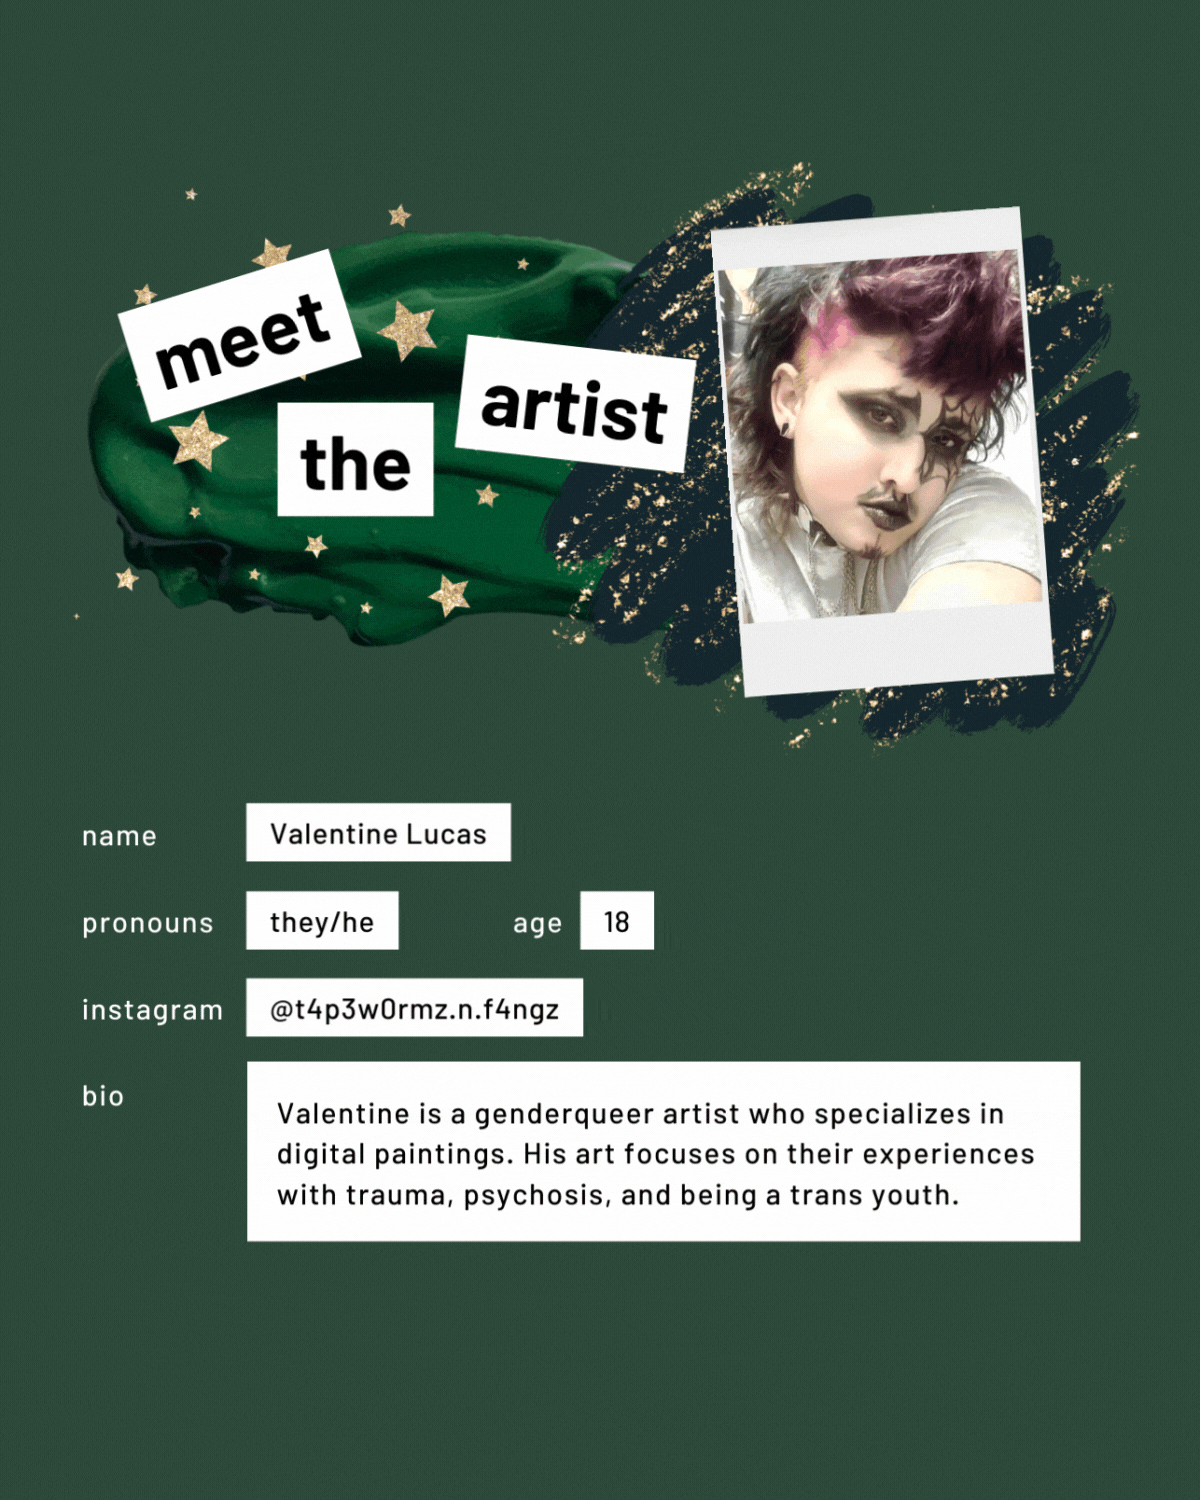 Meet the artist page with a photo. Name: Valentine Lucas. Pronouns: they/he. Age: 18. Instagram:@t4p3w0rmz.n.f4ngz. Bio: Valentine is a genderqueer artist who specializes in digital paintings. His art focuses on their experiences with trauma, psychosis, and being a trans youth."